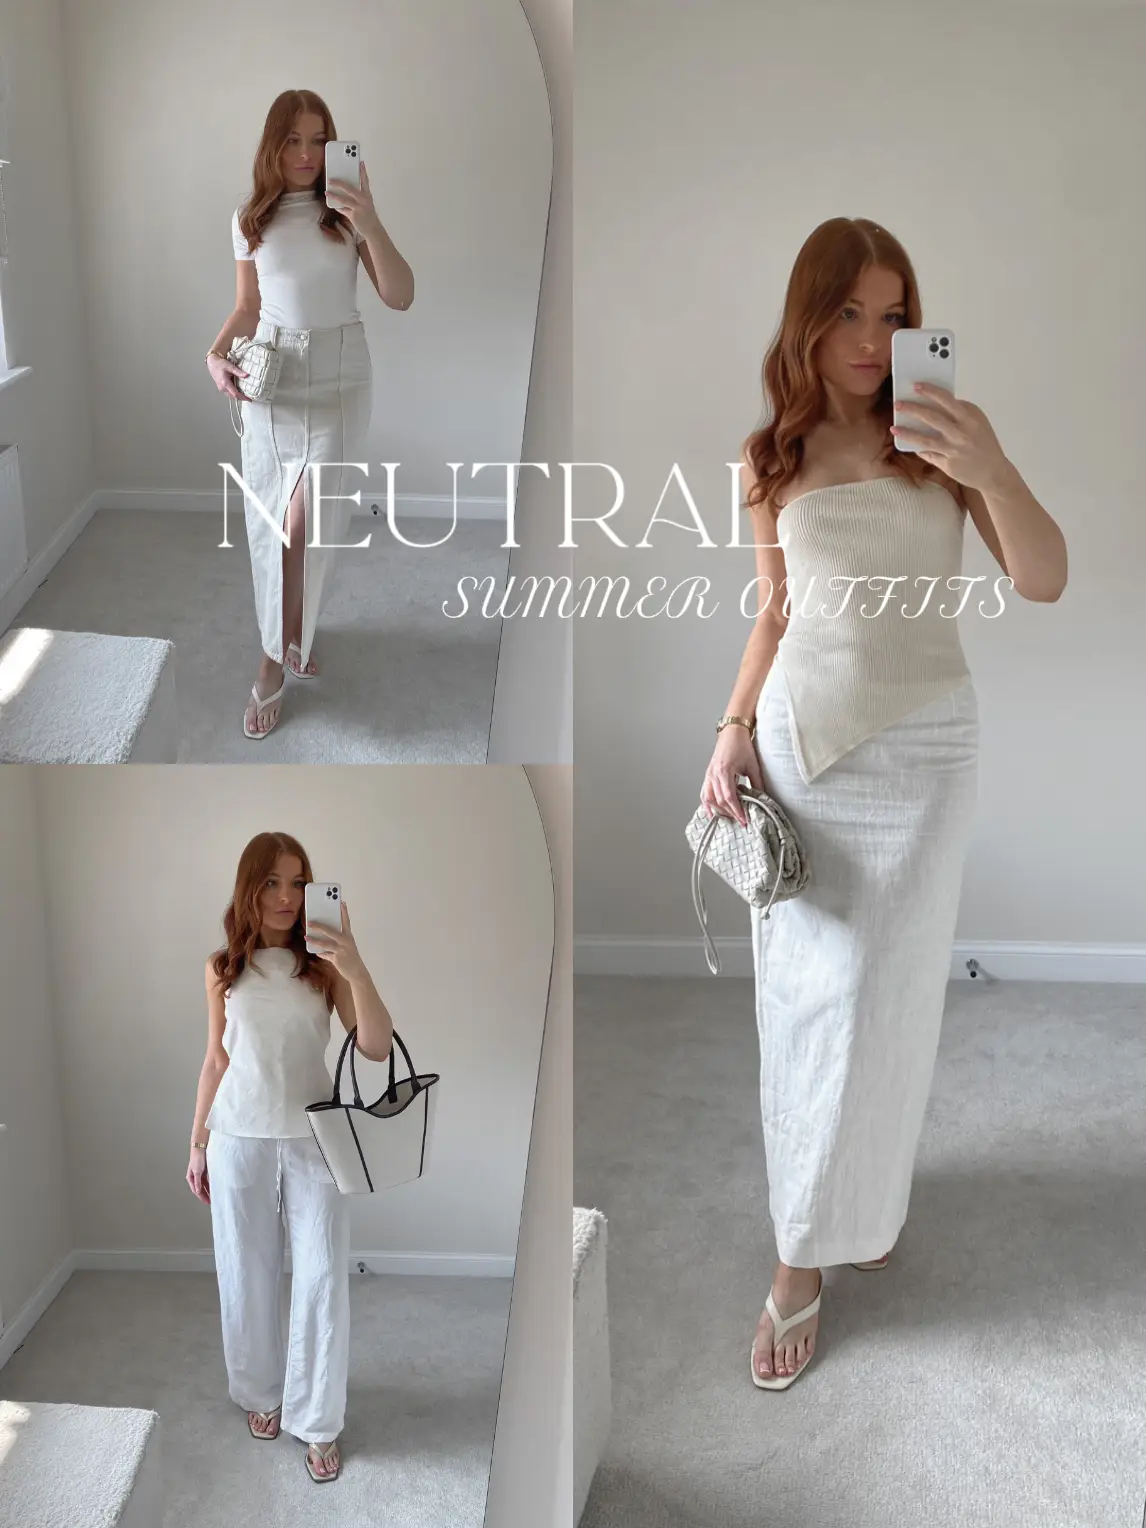 Keep or Return? Neutral summer outfits from Cos, Gallery posted by  Kavveeta